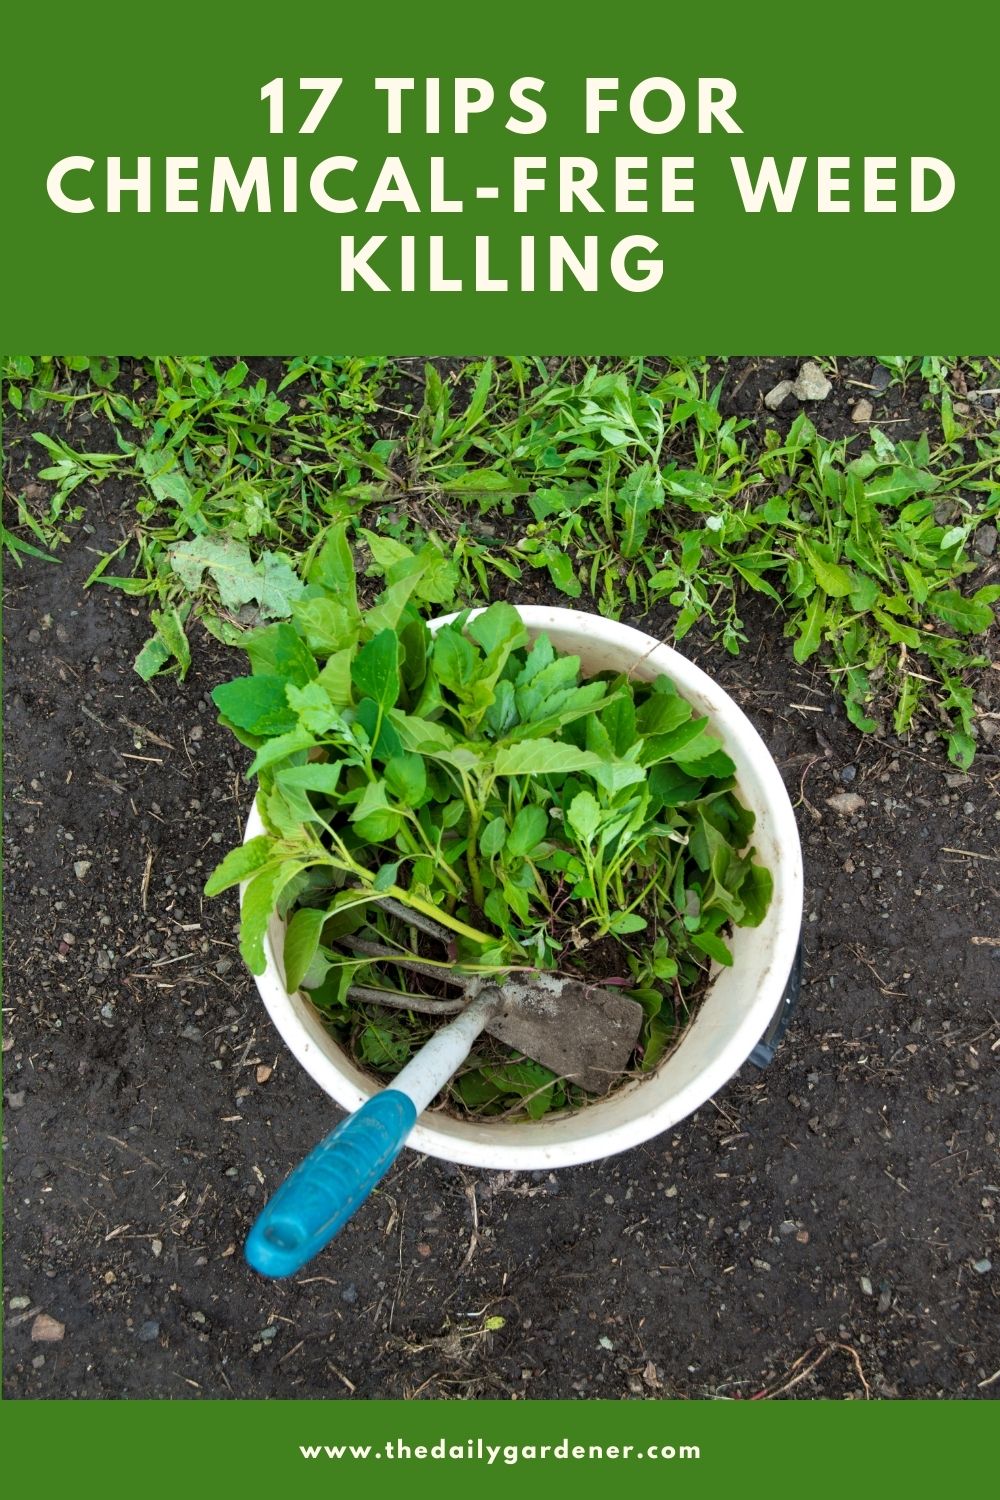 17 Tips for Chemical-Free Weed Killing 1